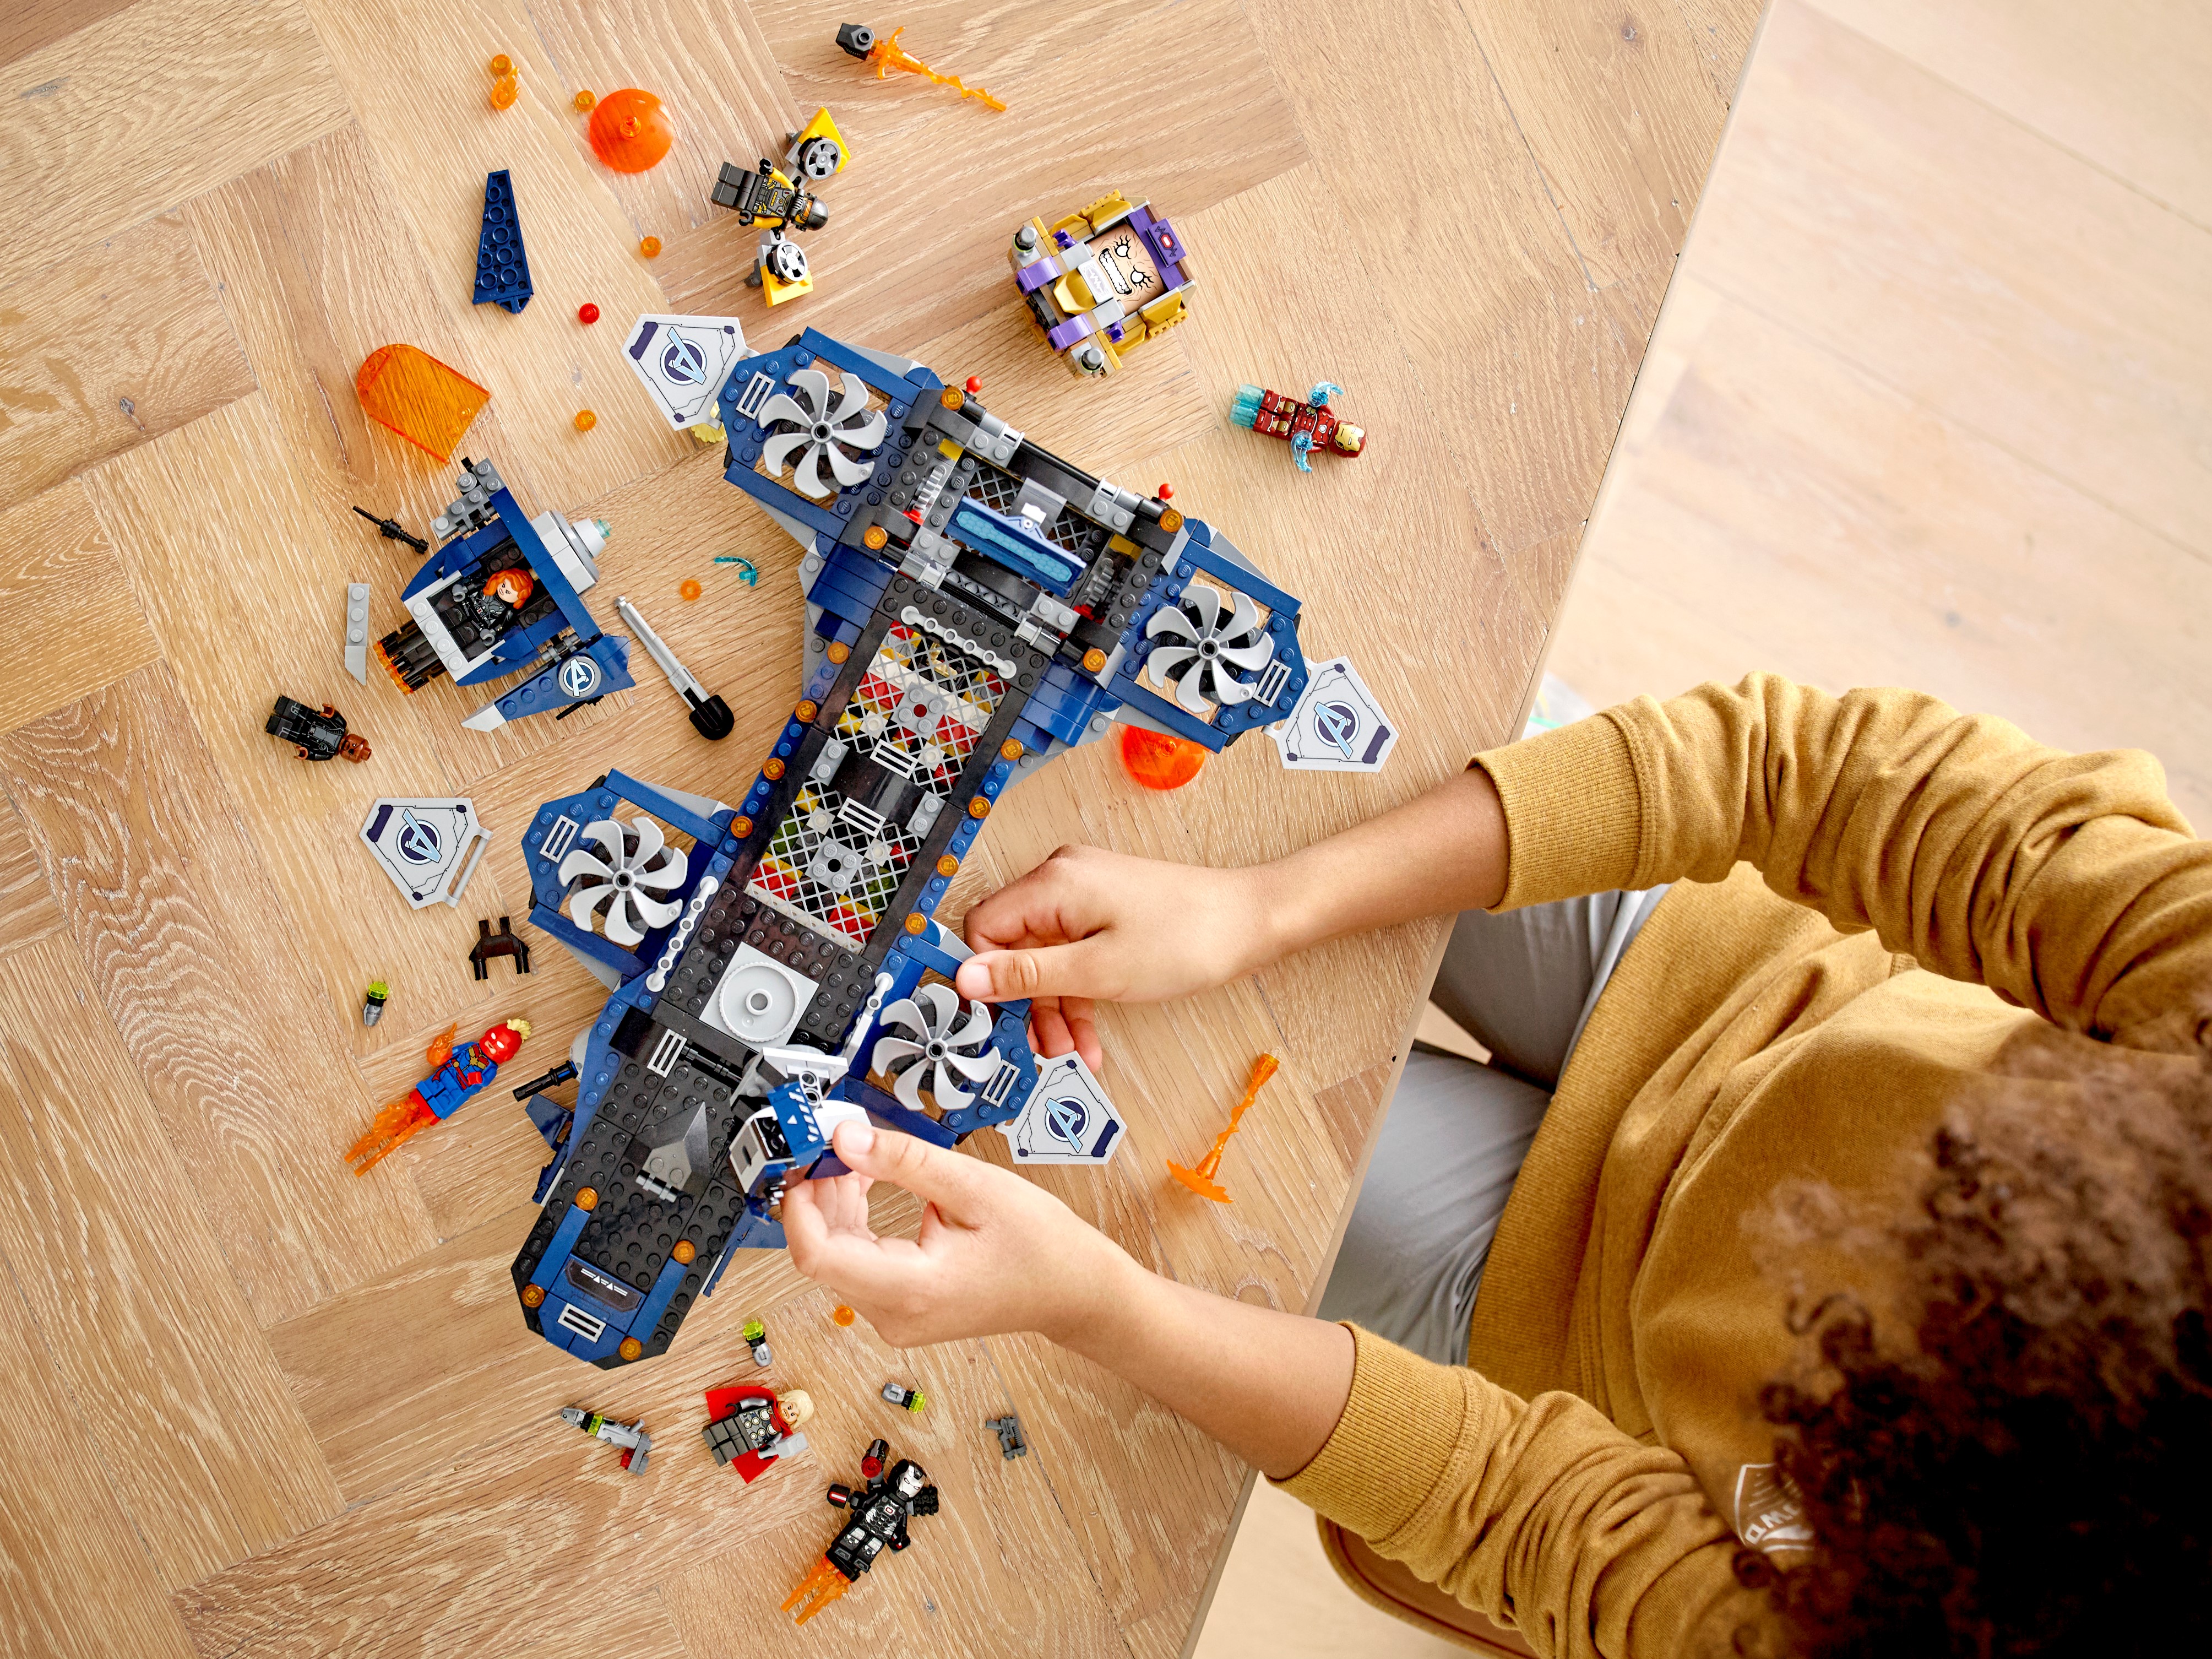 Avengers Helicarrier 76153 | Marvel | Buy online at the Official LEGO® Shop  US